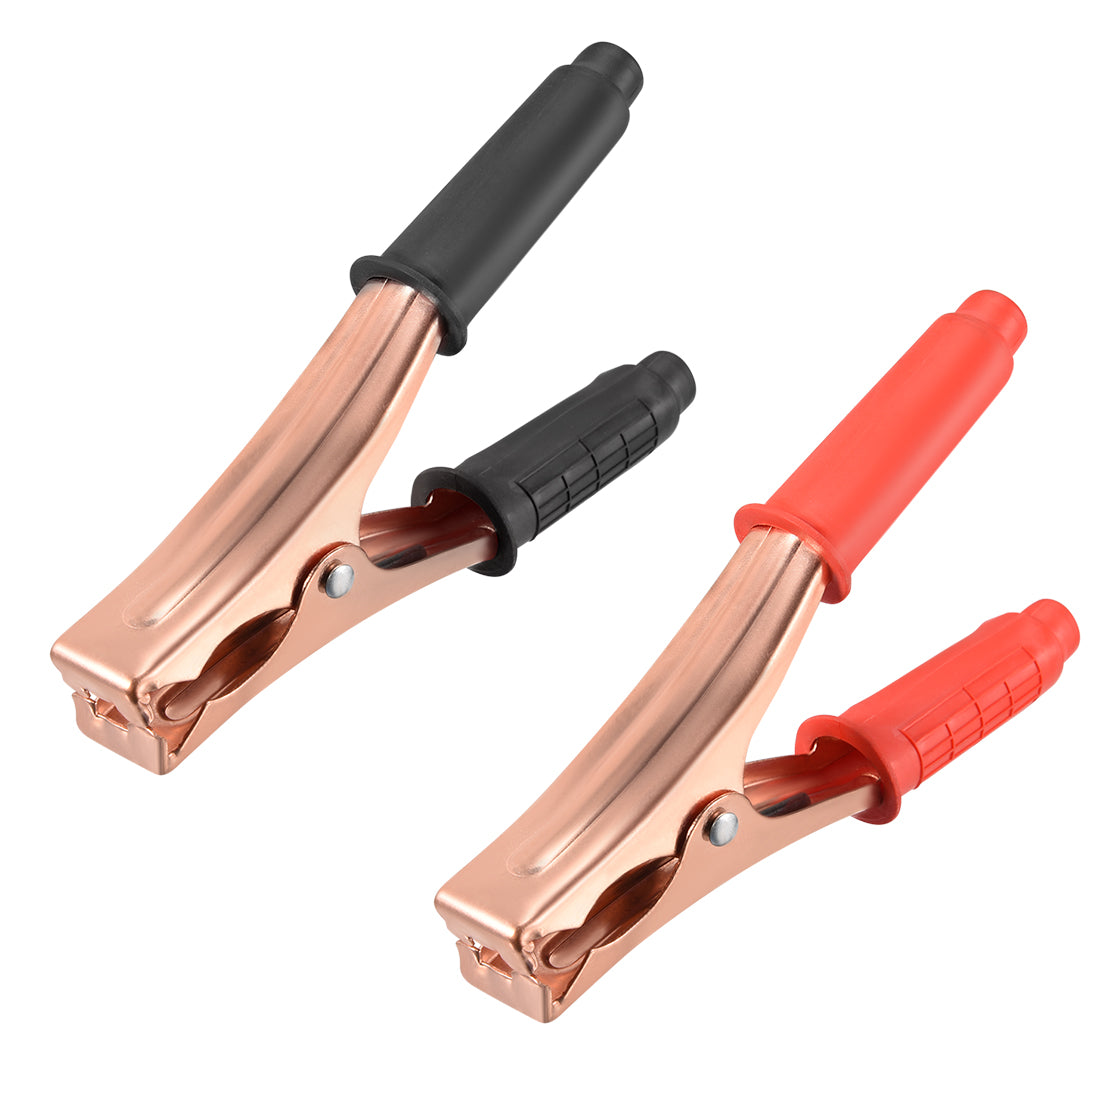 uxcell Uxcell 2 Pcs Copper Plated Alligator Clip Adapter 200A Test Clamp Half Shroud Black Red